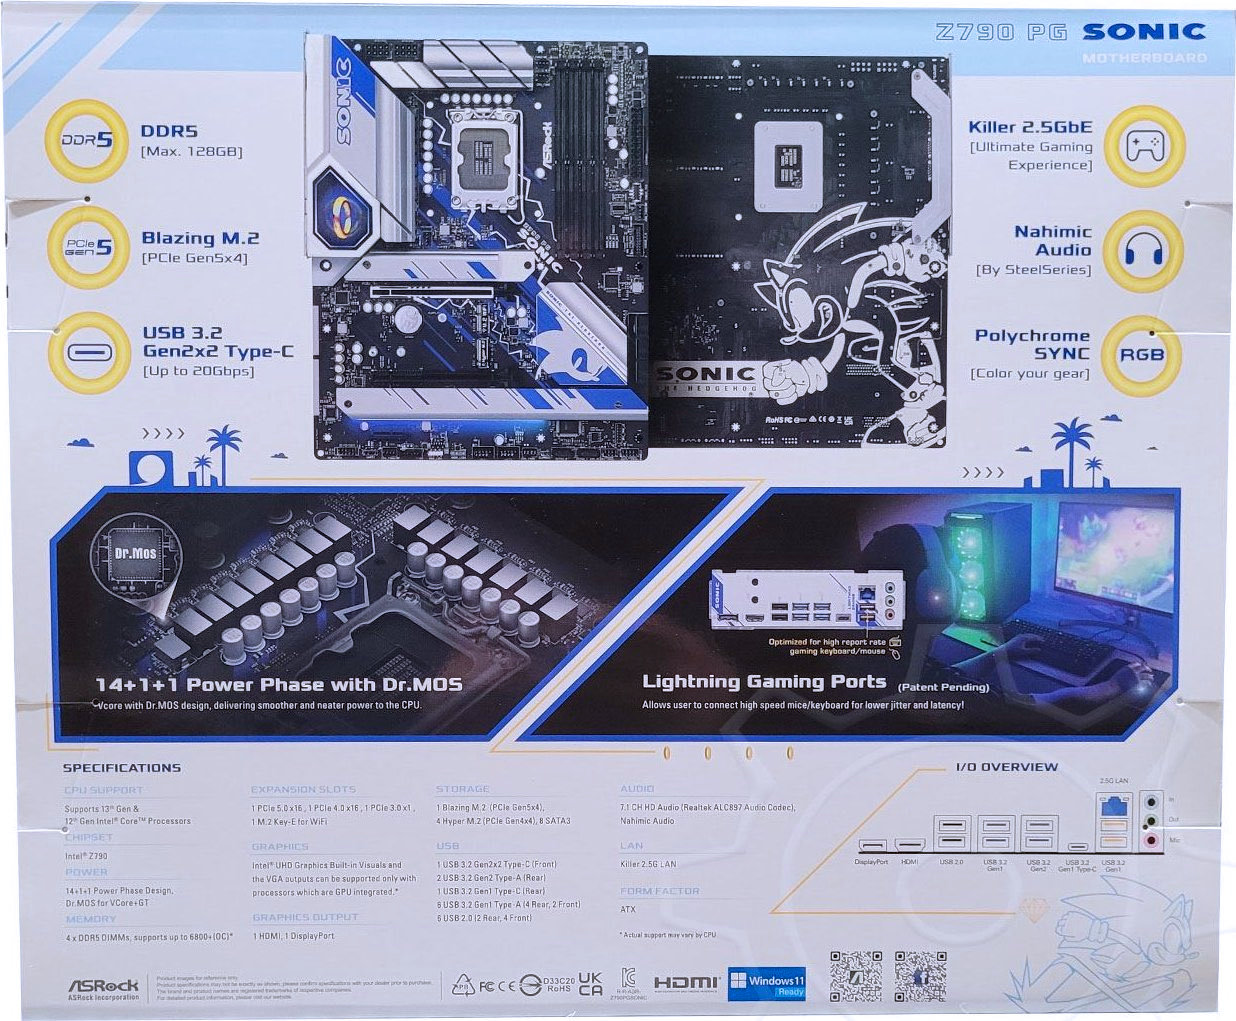 ASRock has Intel Z790 motherboard approved by Sonic the Hedgehog